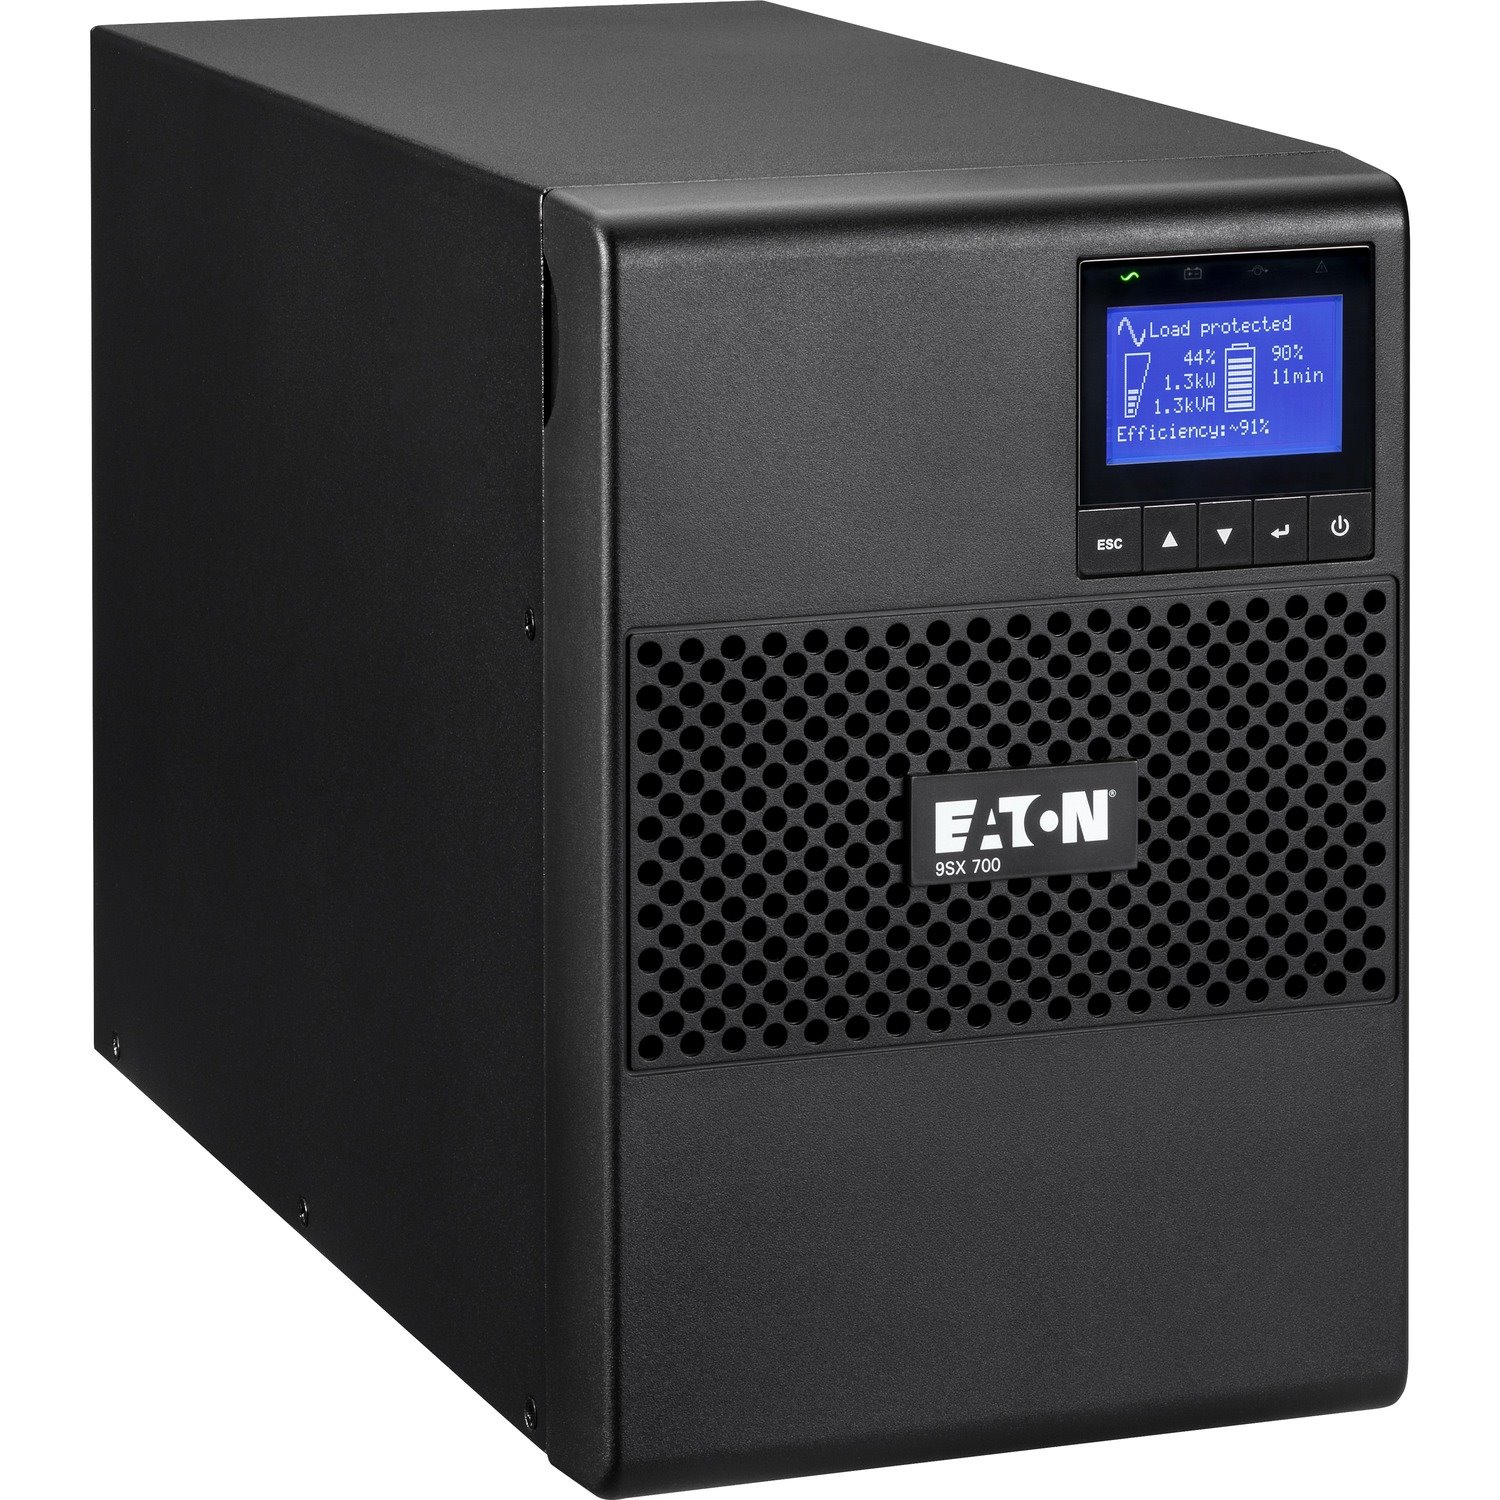 Eaton 9SX 700VA 630W 120V Online Double-Conversion UPS - 6 NEMA 5-15R Outlets, Cybersecure Network Card Option, Extended Run, Tower - Battery Backup